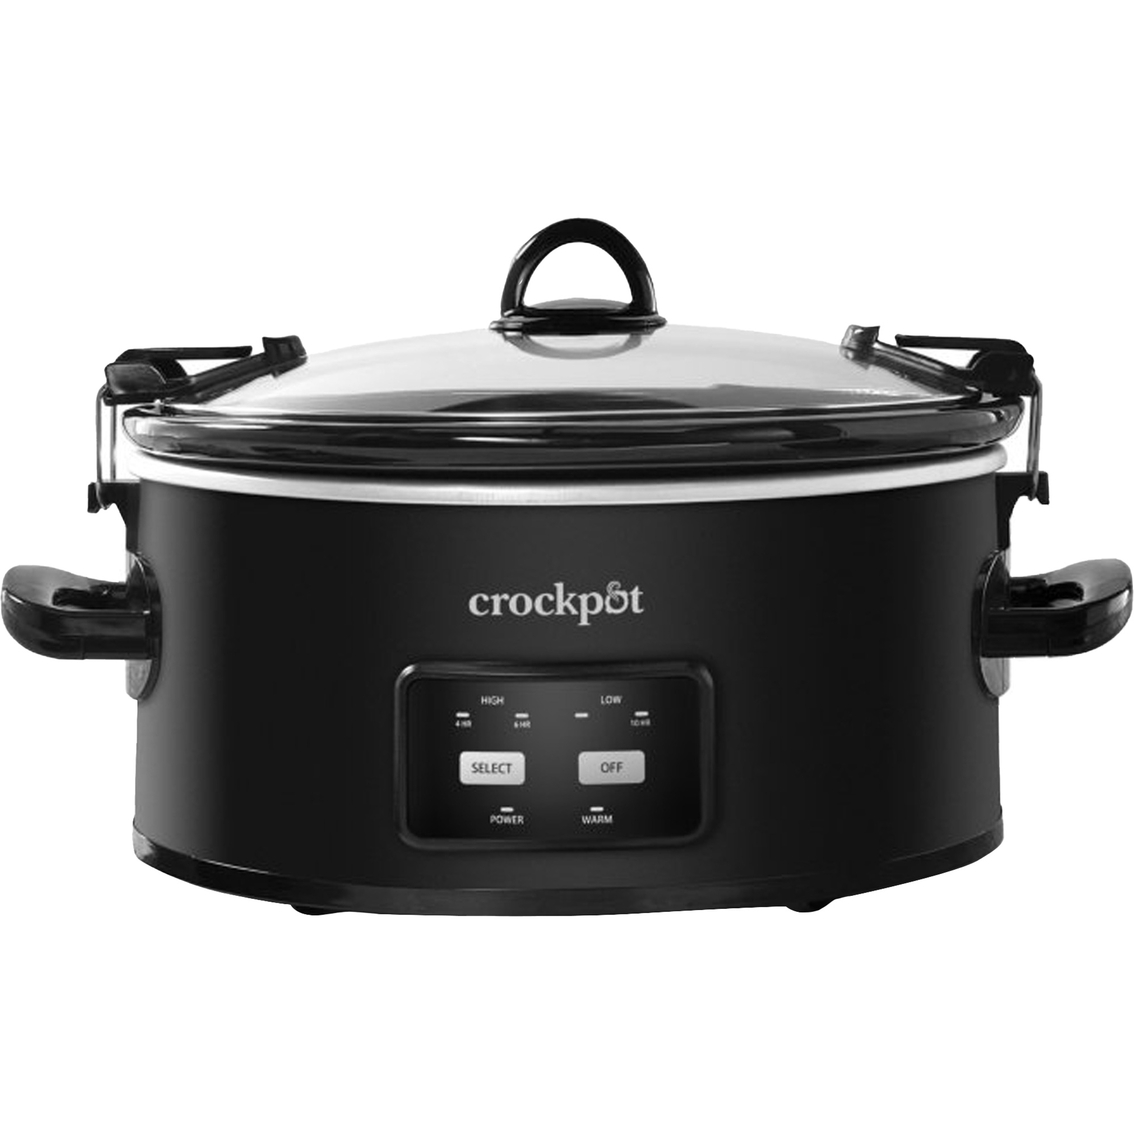 Crock-pot 6 Qt. Programmable Cook And Carry Stainless Steel Slow